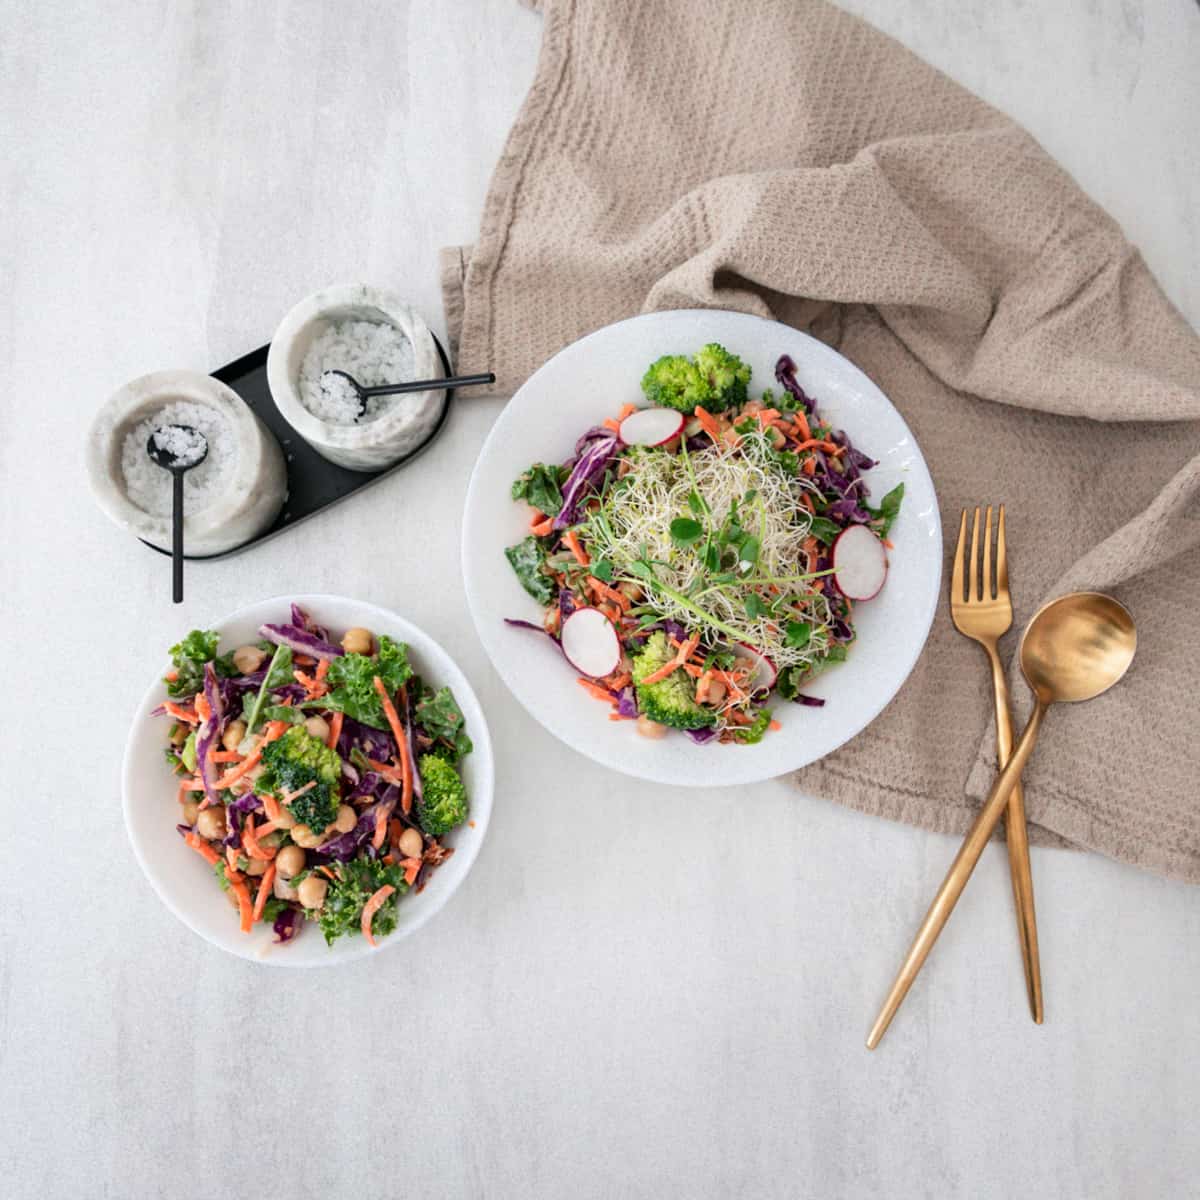 Easy Kale Salad Recipe with Carrots and Purple Cabbage Slaw